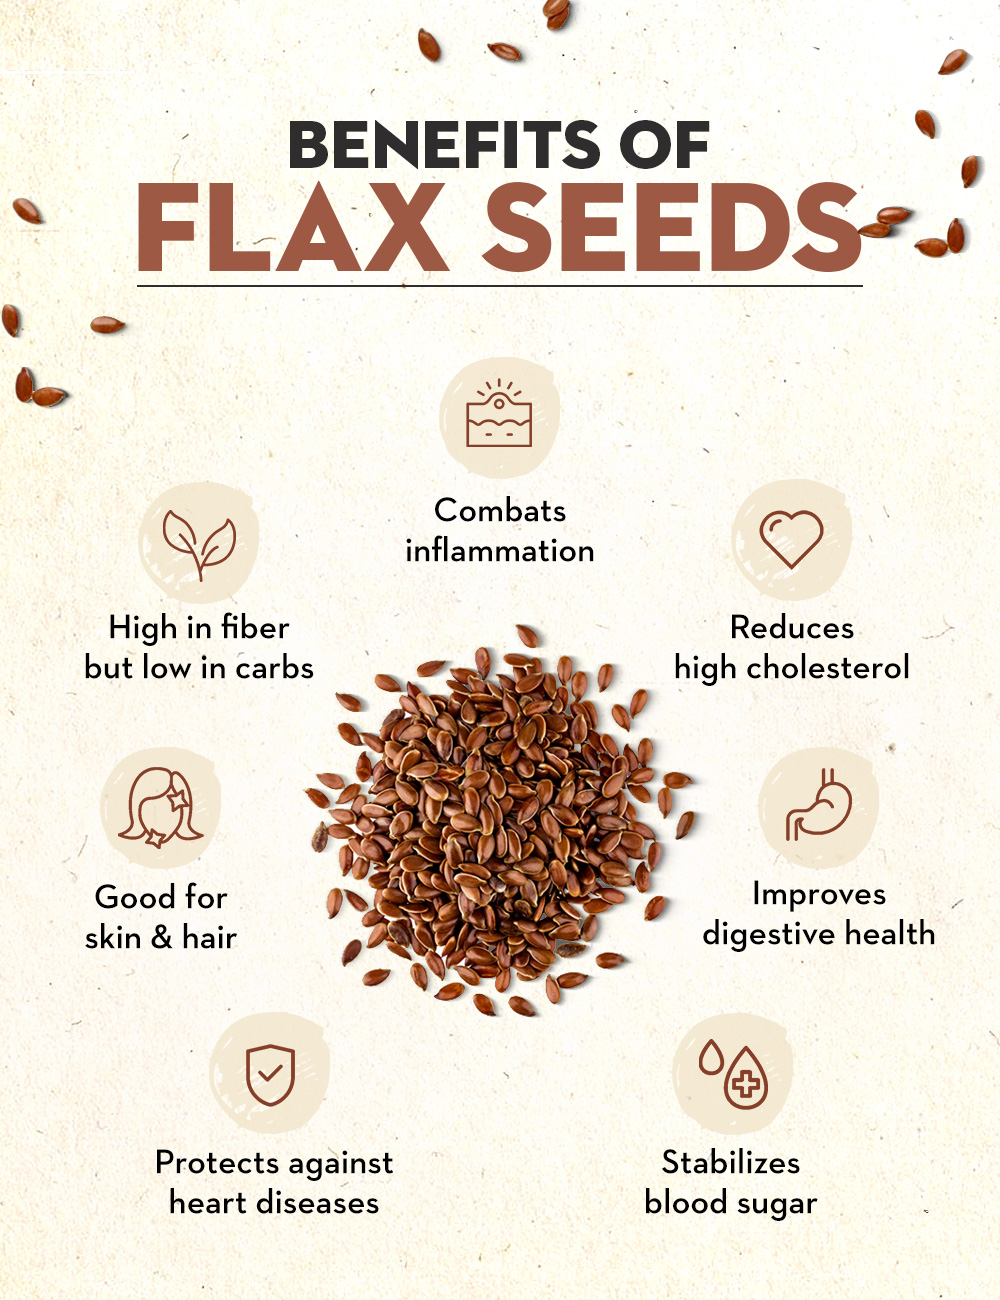 Flaxseeds: Nutritional Facts and Health Benefits